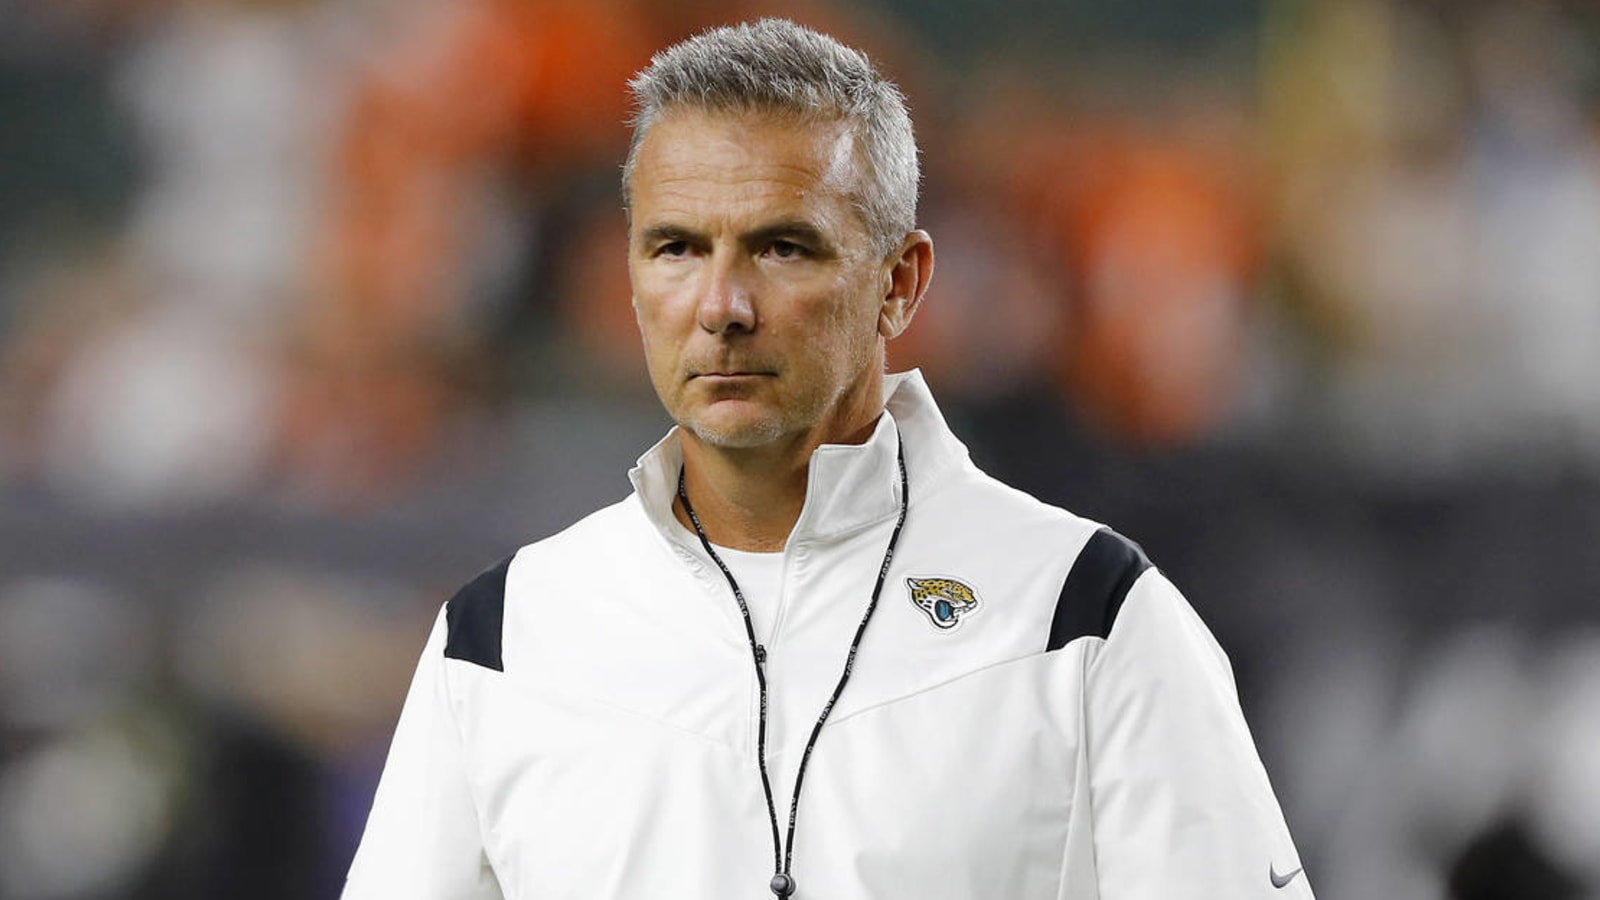 Jags player unloads on Meyer, says coach has ‘zero credibility’